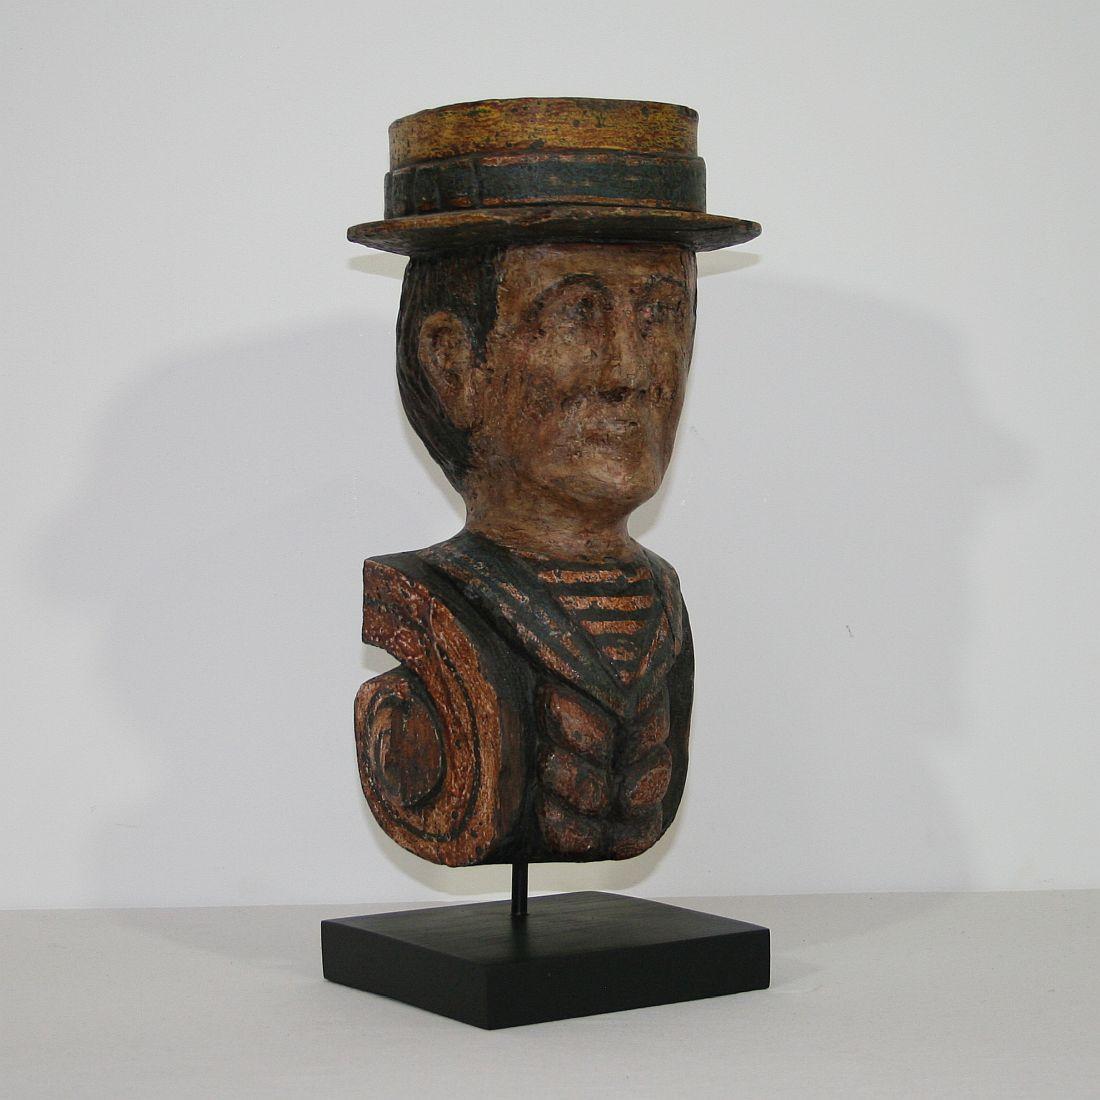 Beautiful Folk Art object representing the head of a sailor.
France, circa 1880-1900.
Weathered, small losses and old repairs.